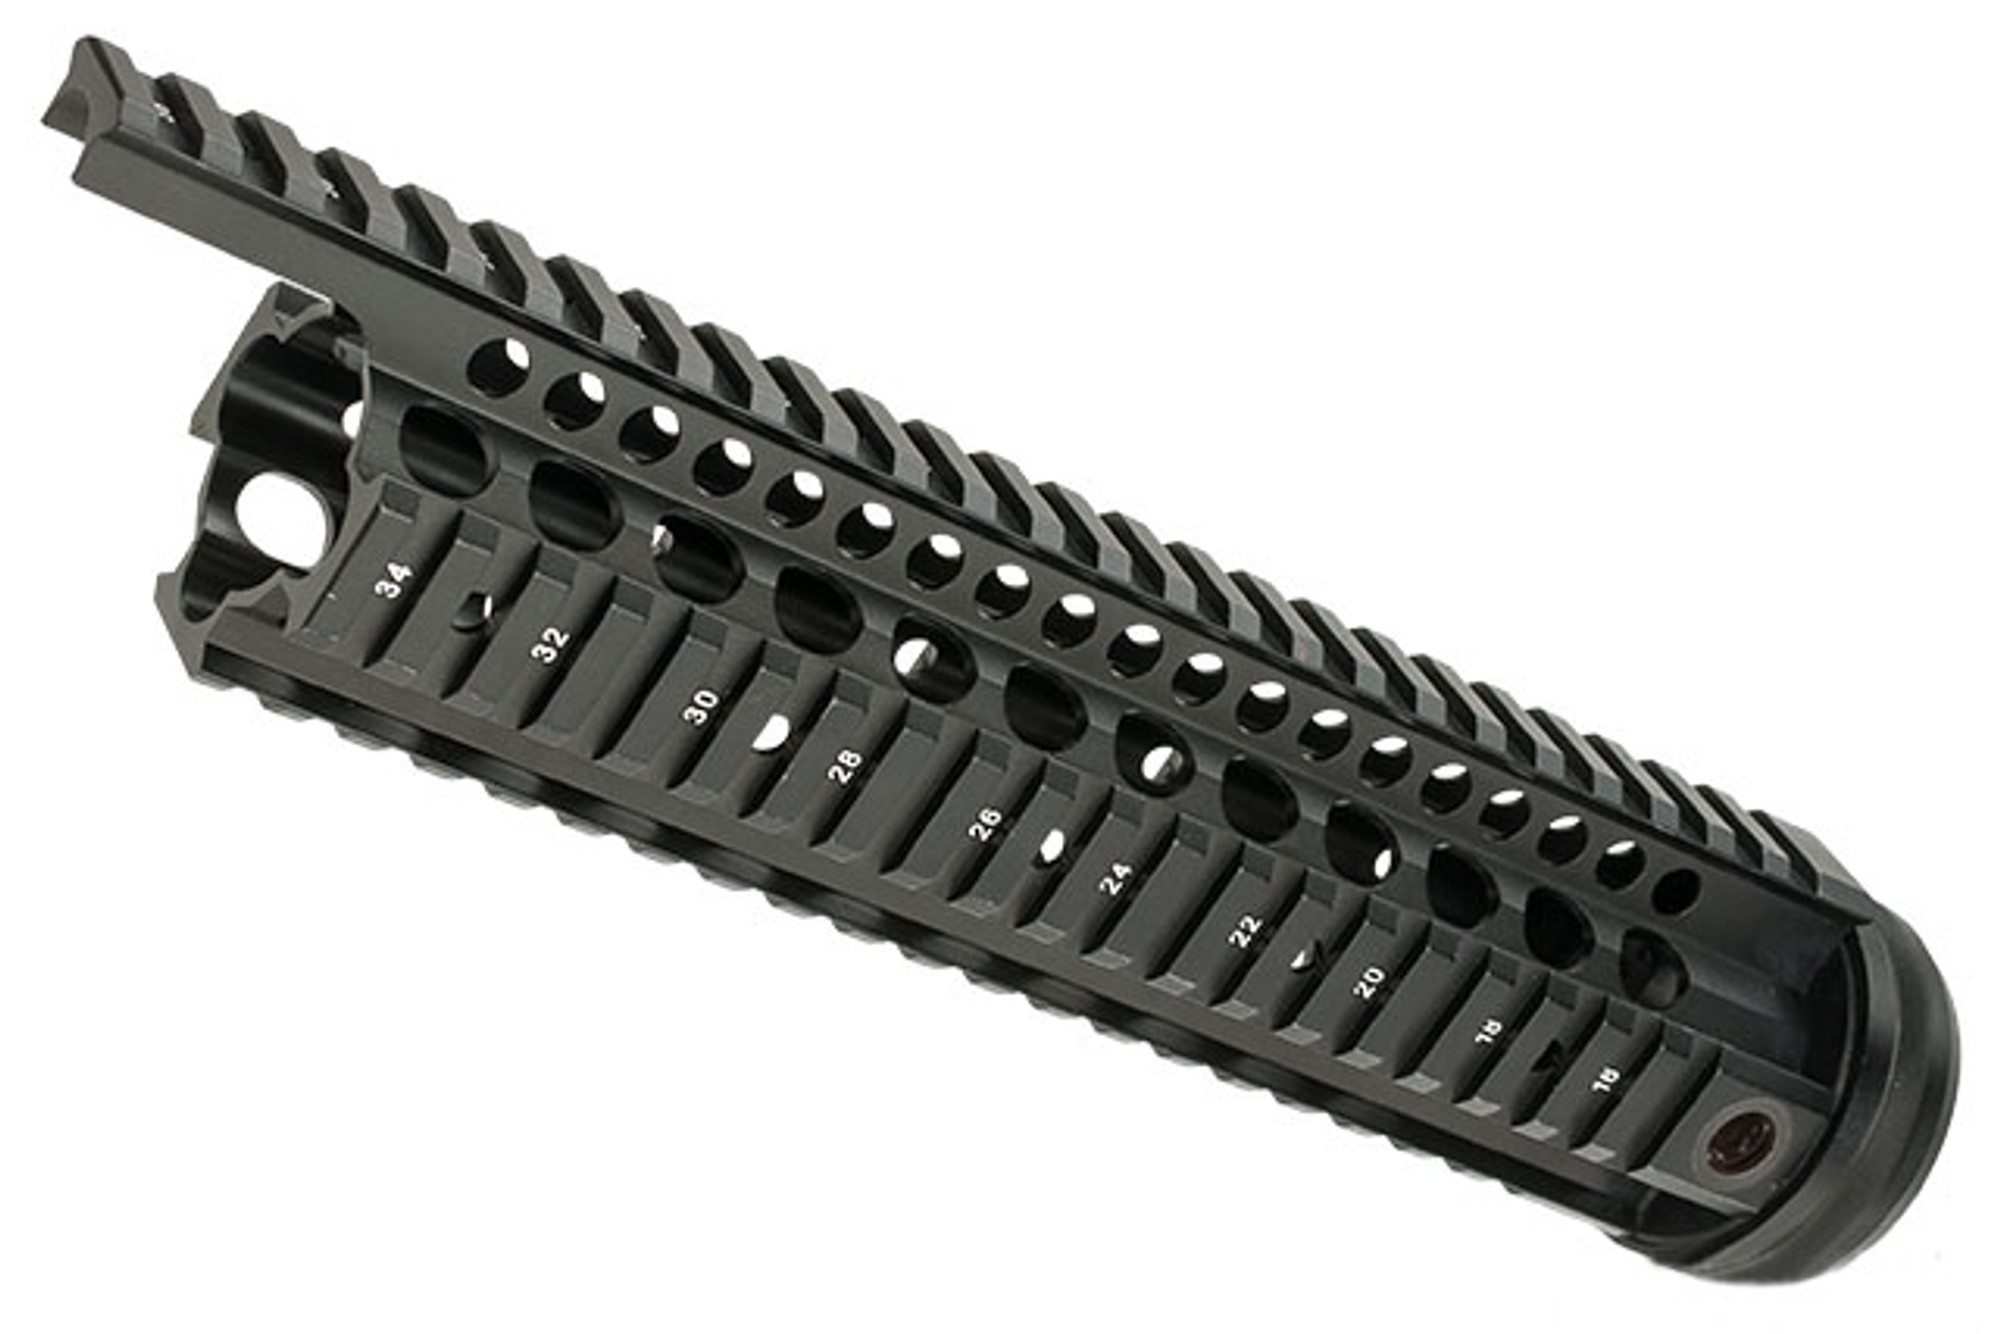 Avengers CNC Aluminum Free Float Rail System w/ 1" Top Extension for M4 / M16 Series Airsoft AEG Rifles - 10.5"